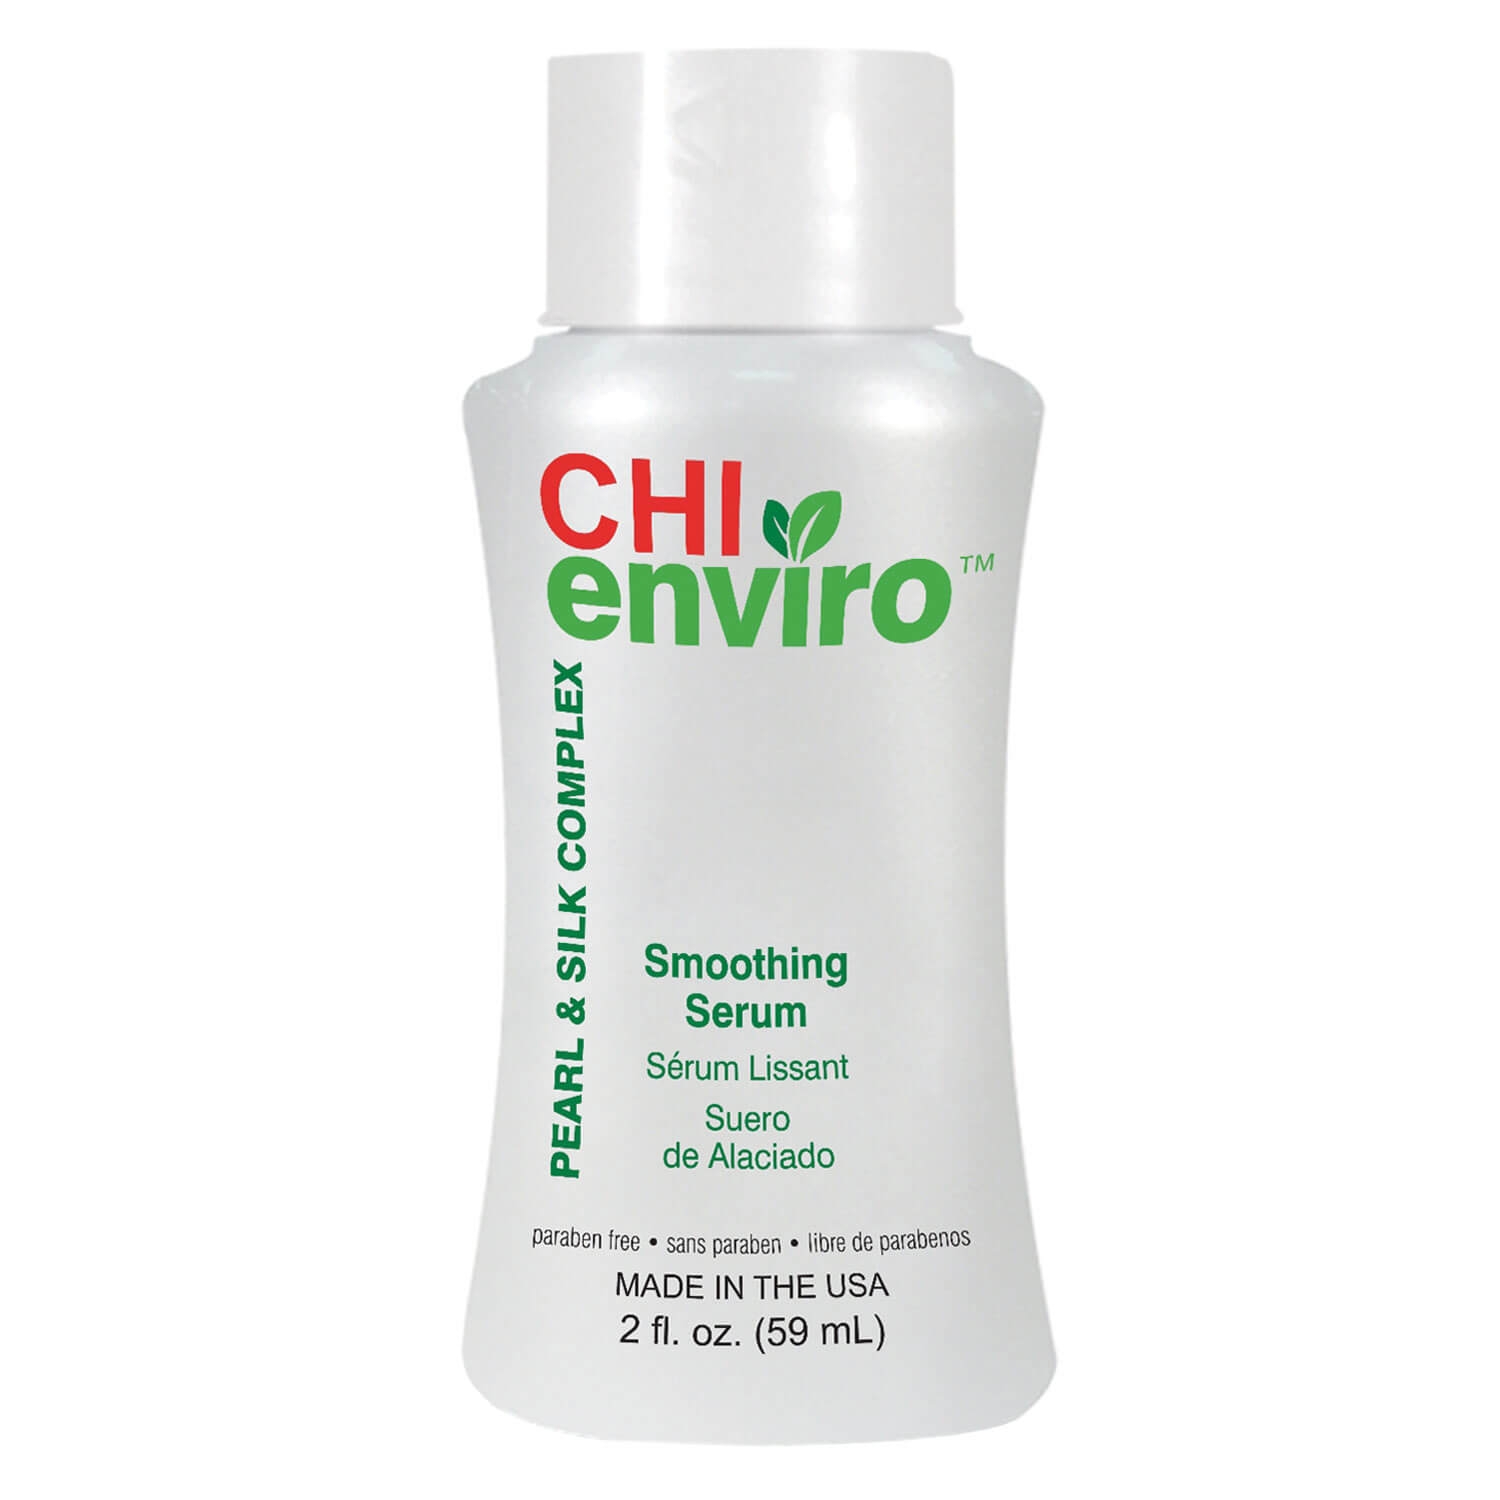 Product image from CHI enviro - Smoothing Serum